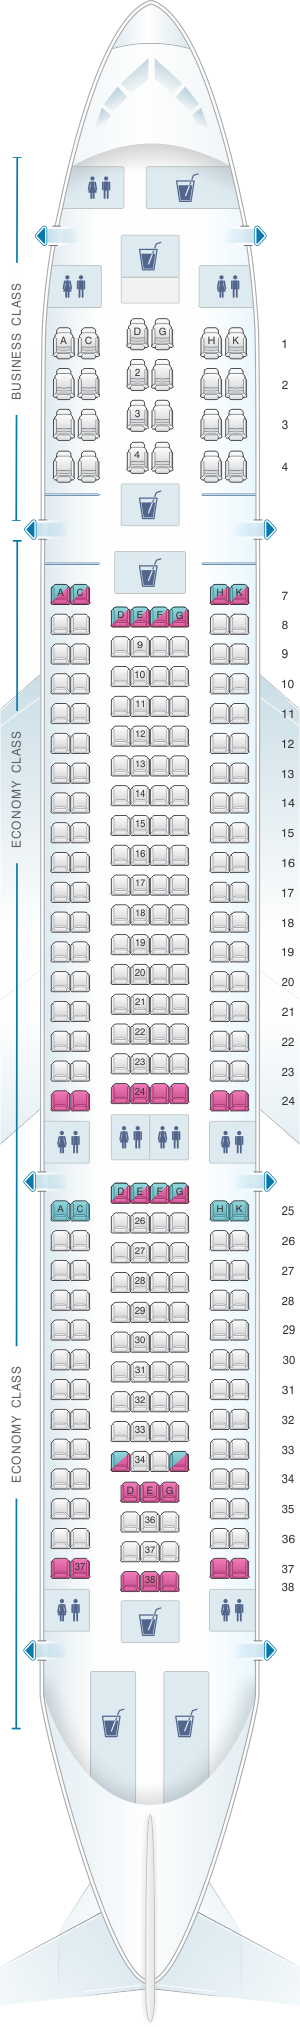 Seat map for Egyptair Airbus A330 243